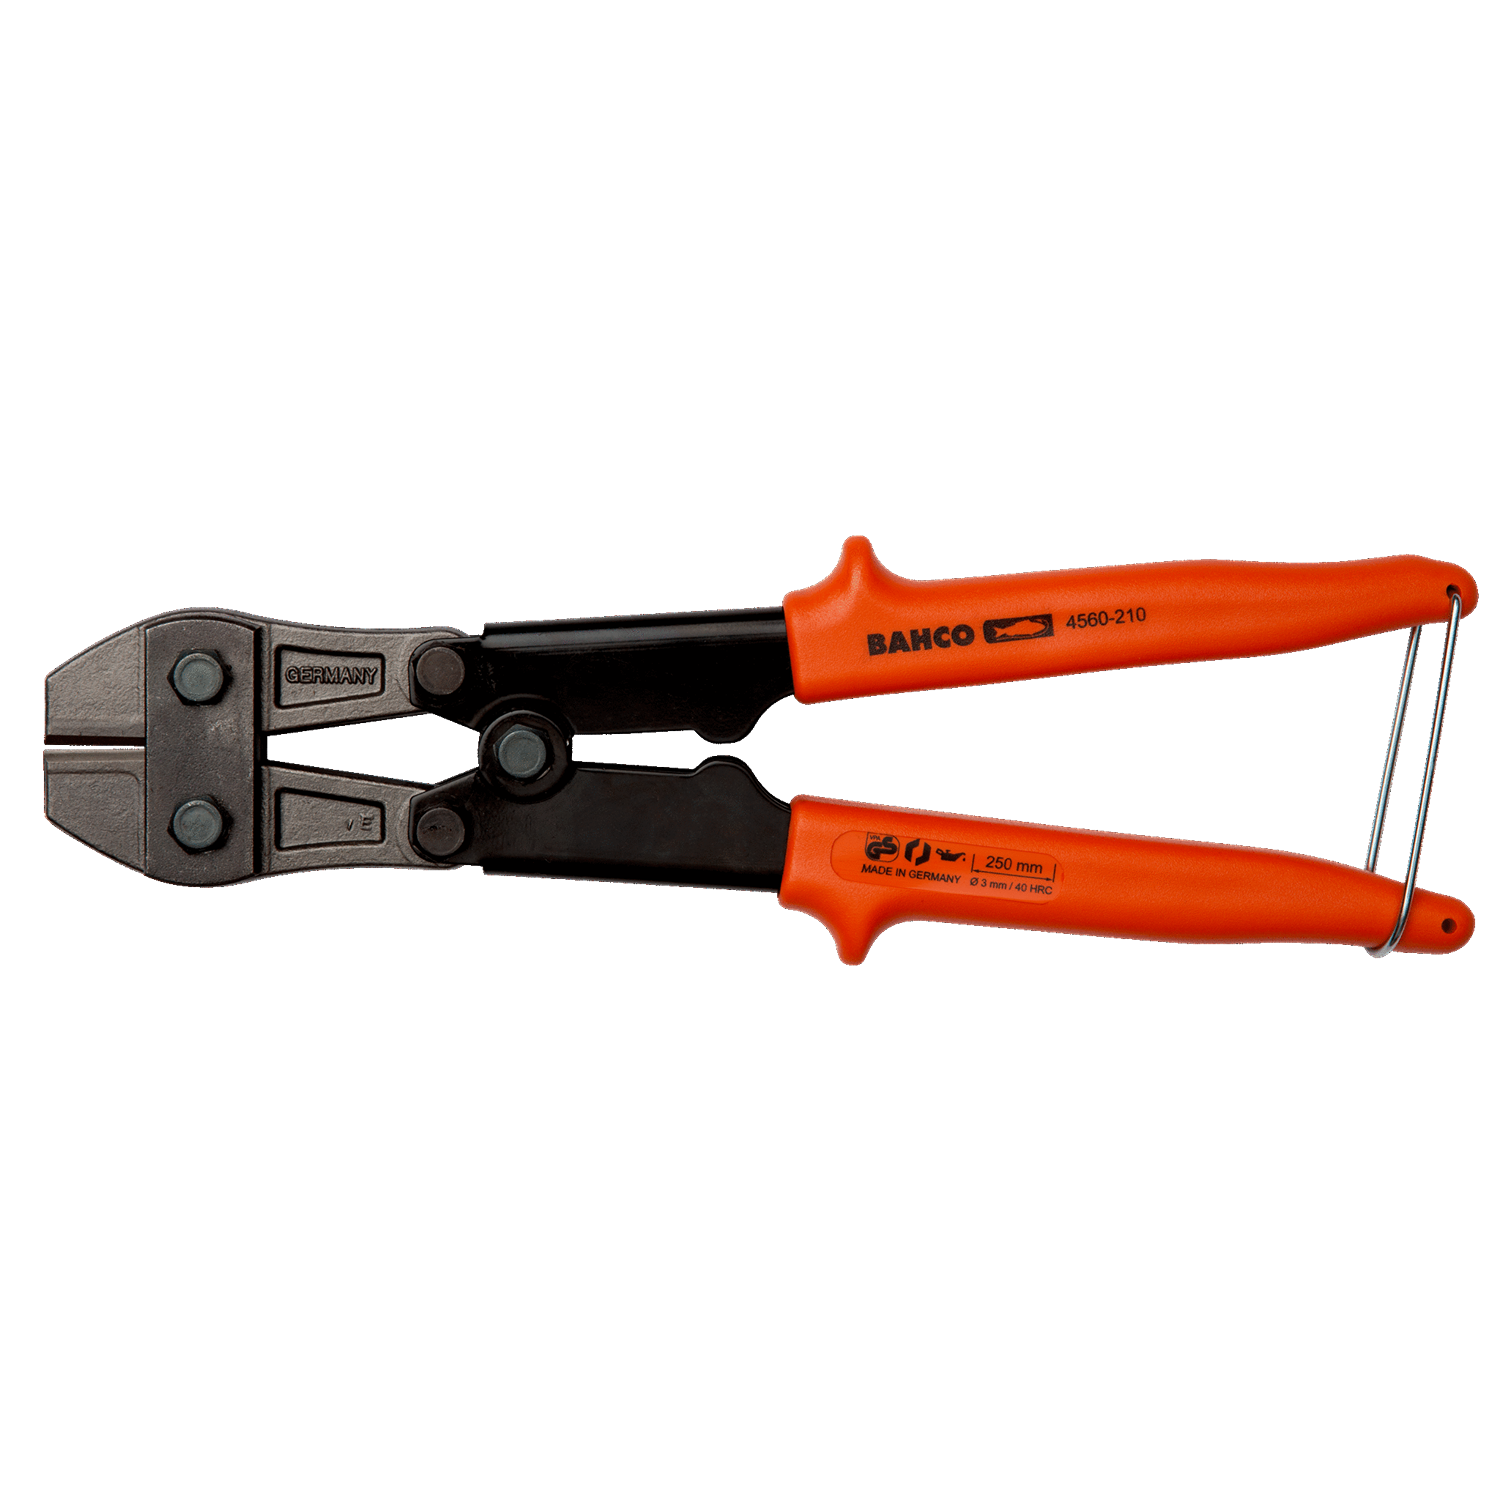 BAHCO 4560-210 Diagonal Bolt Cutter Cutting Pliers - Premium Bolt Cutter from BAHCO - Shop now at Yew Aik.